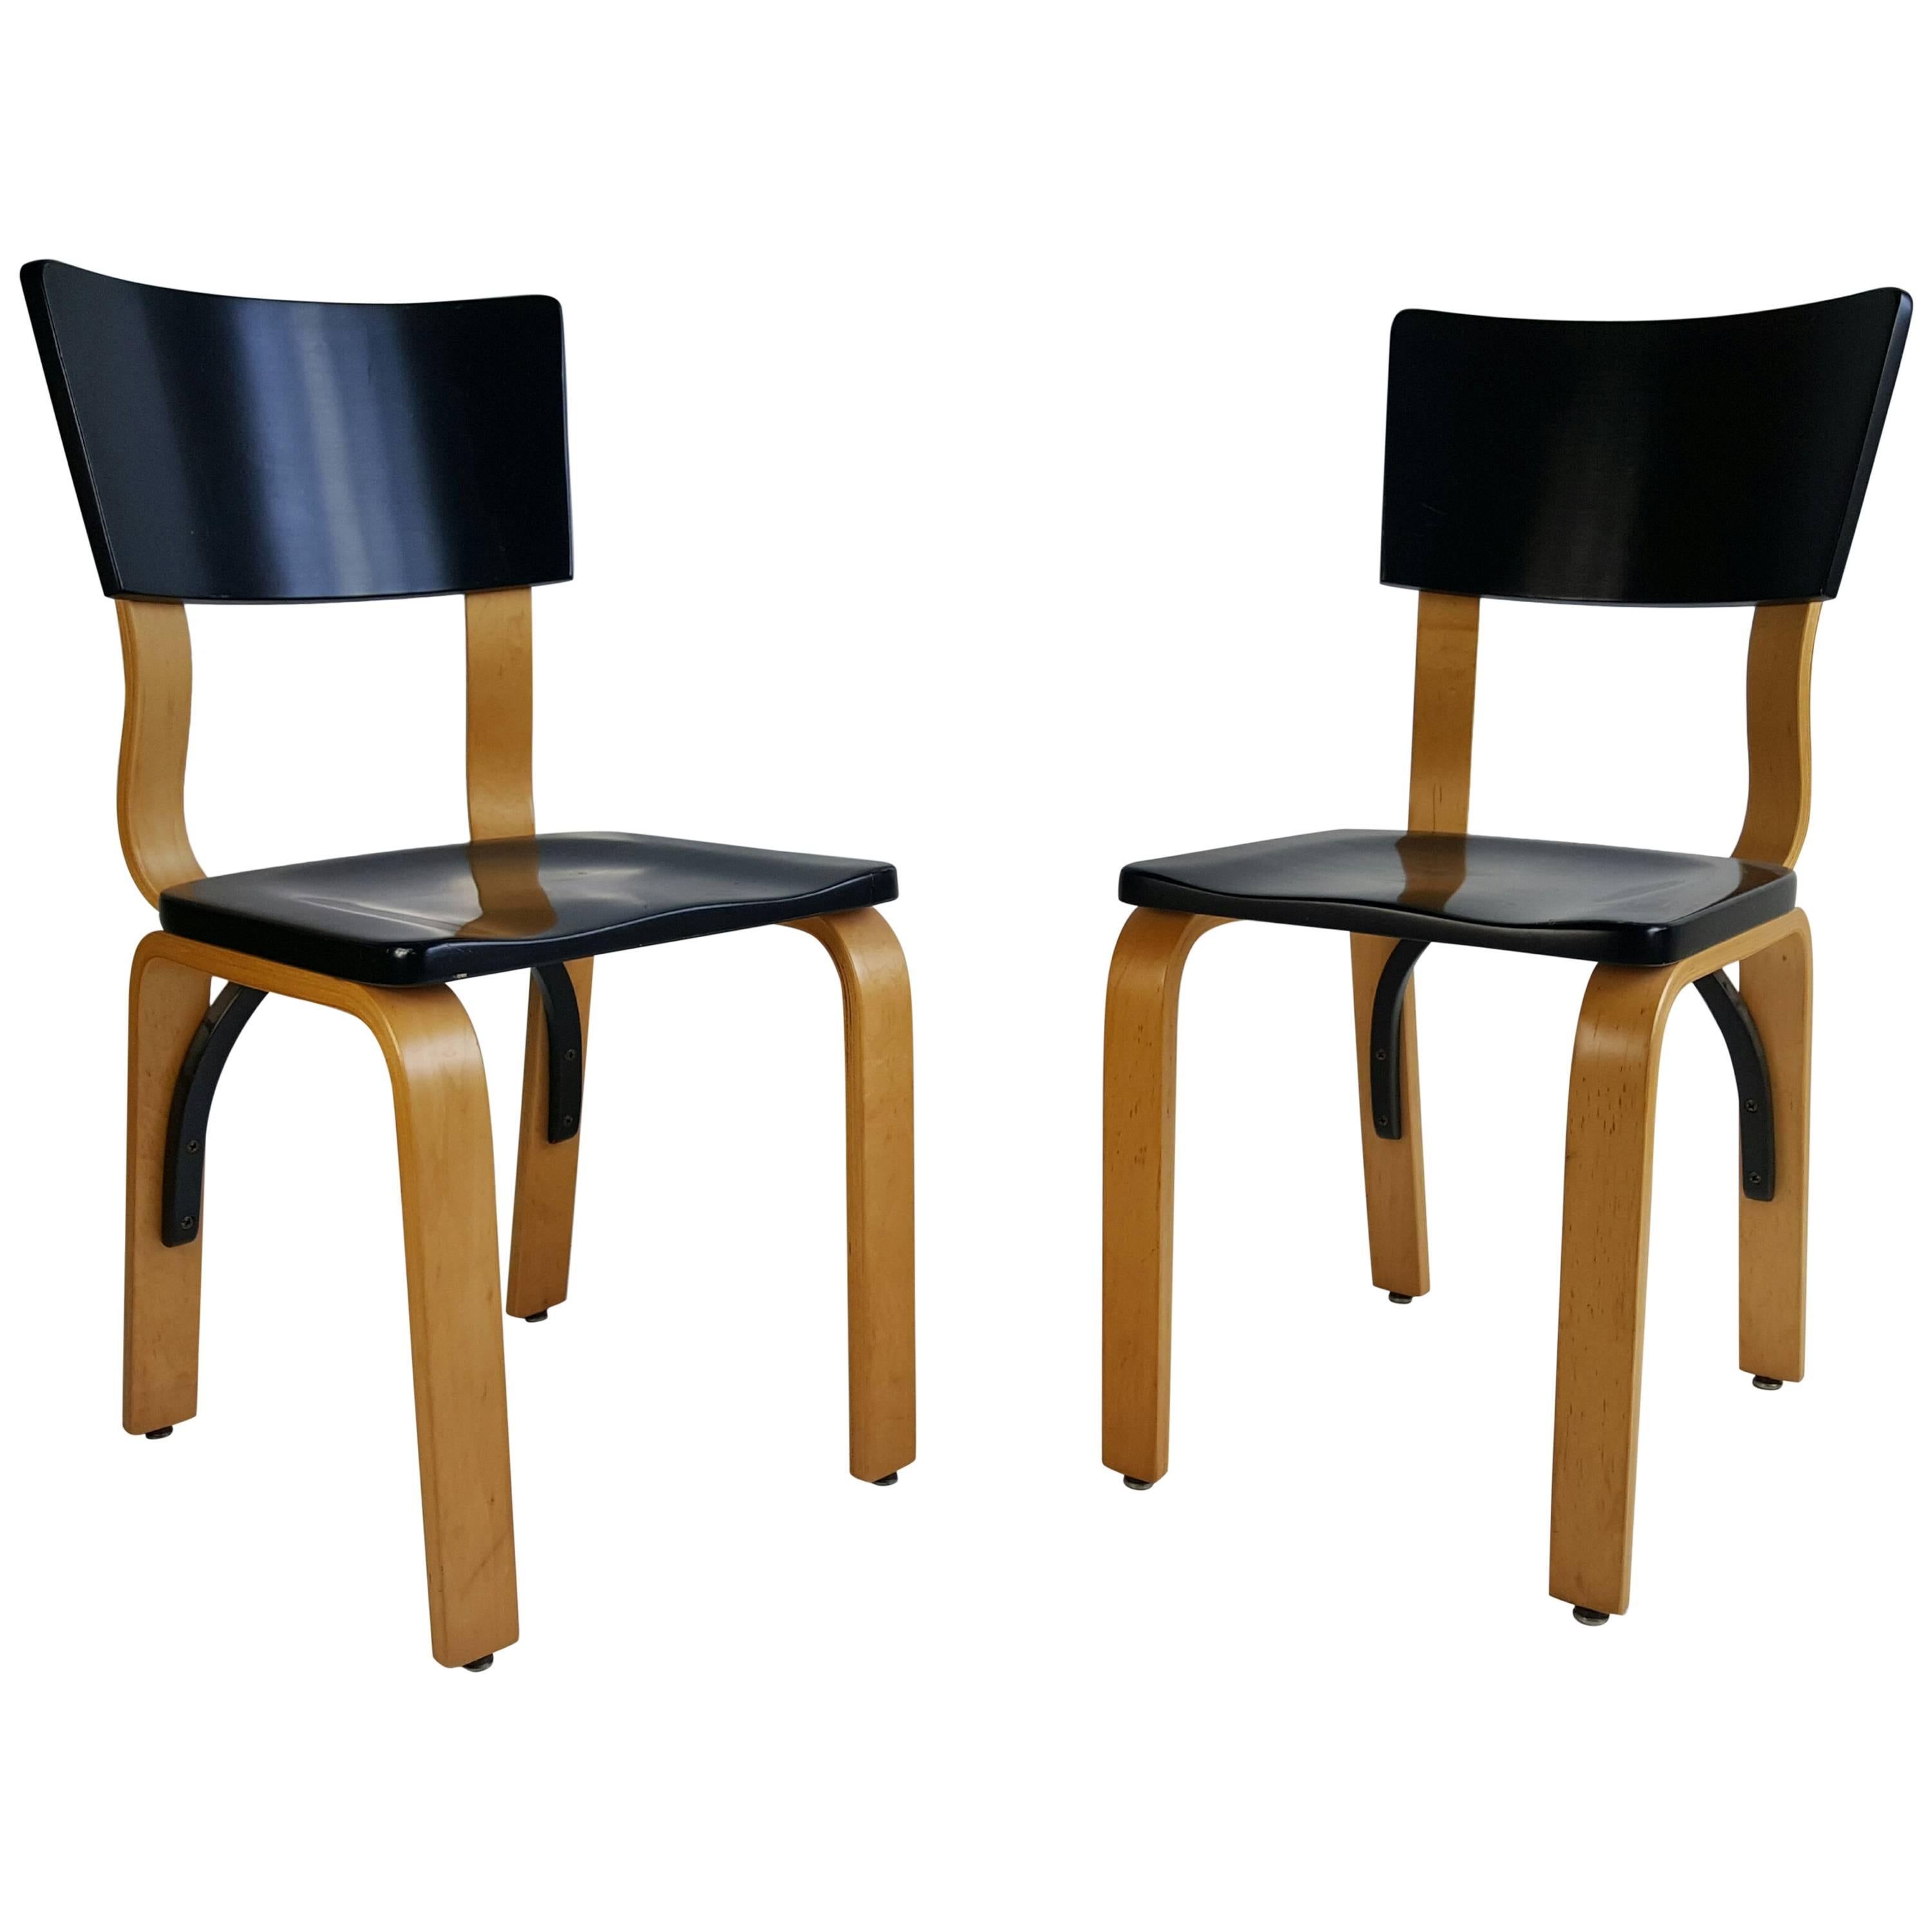 Classic Modernist Bentwood Side Chairs by Thonet